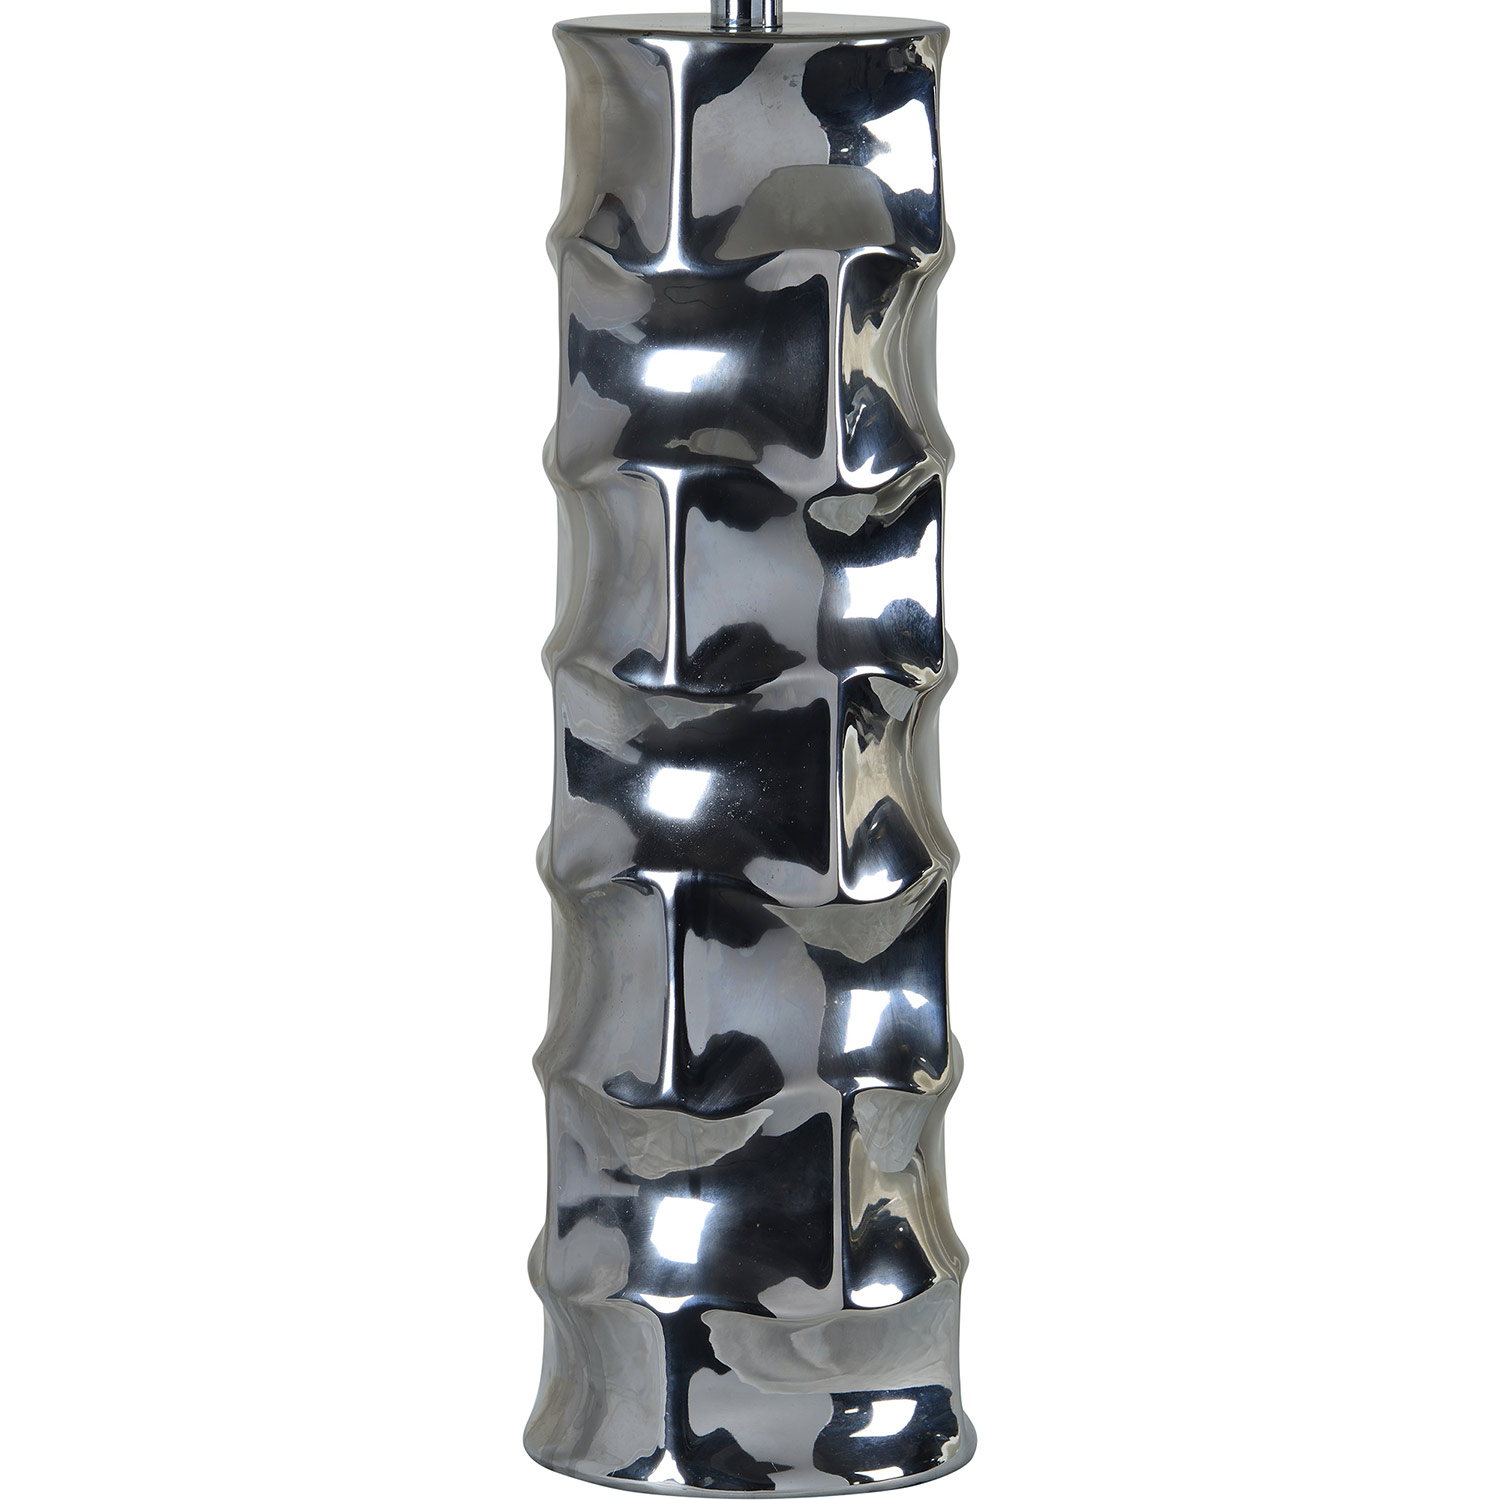 Ren-Wil Quenby Table Lamp - Silver Plated